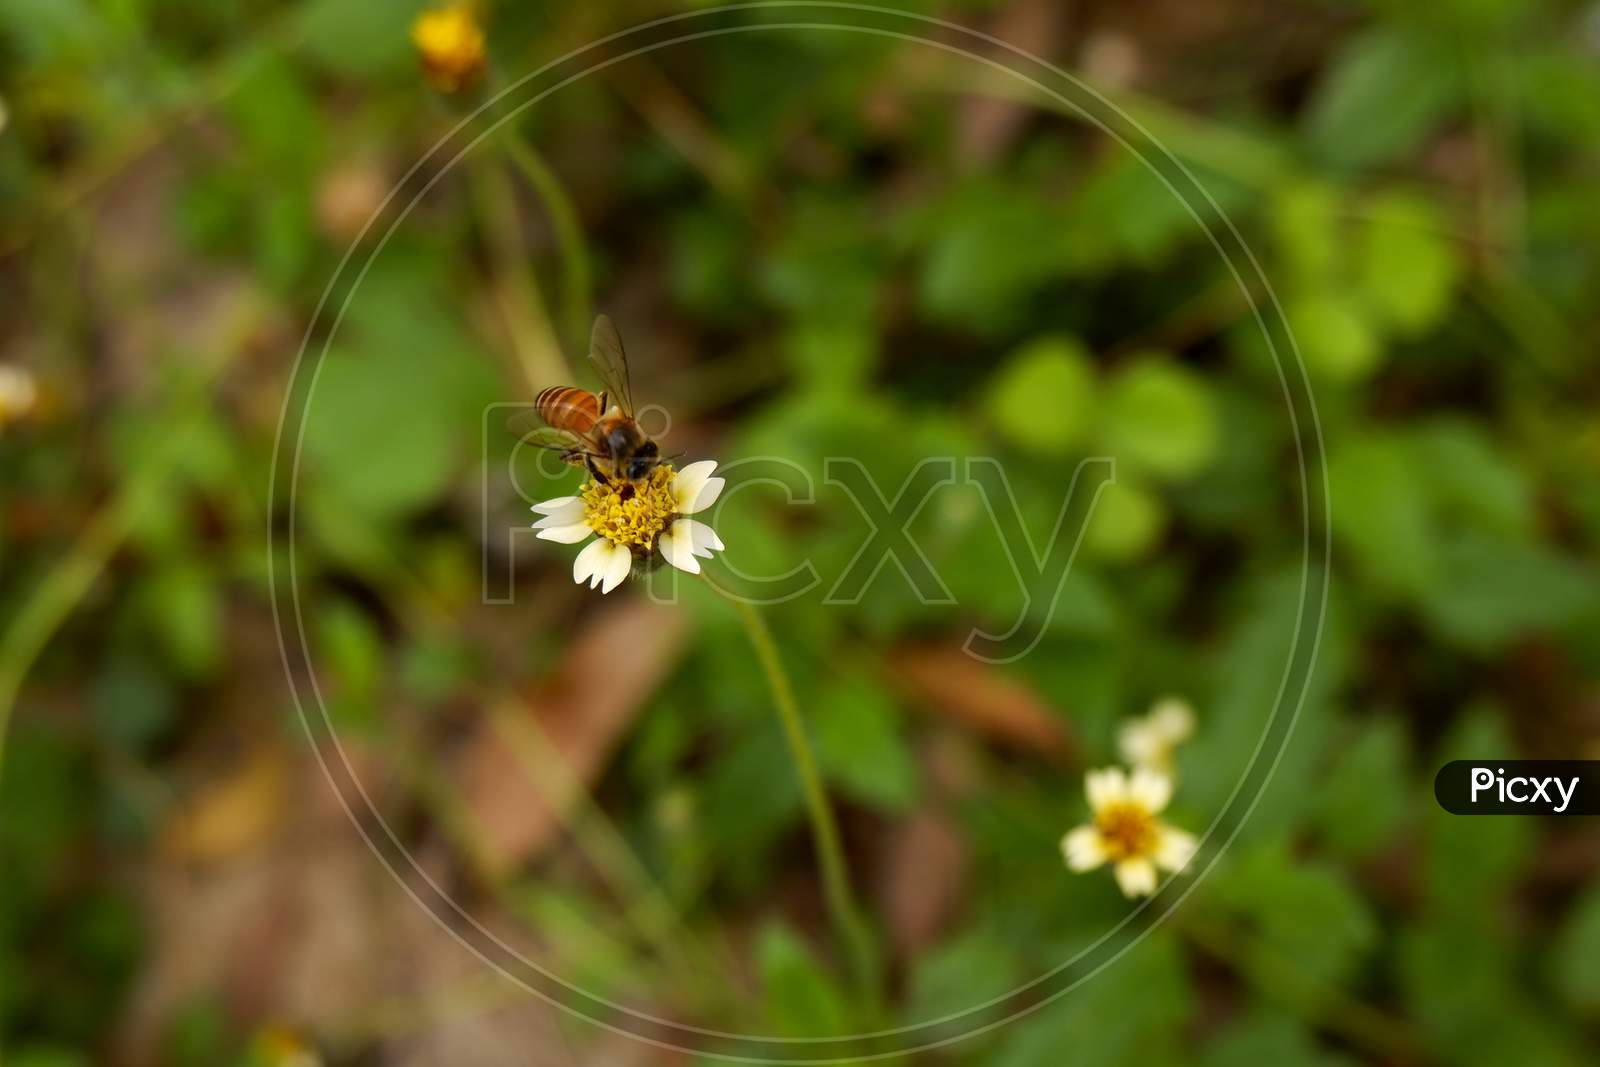 Closeup View Of Honey Bee With Grass Flower In Field